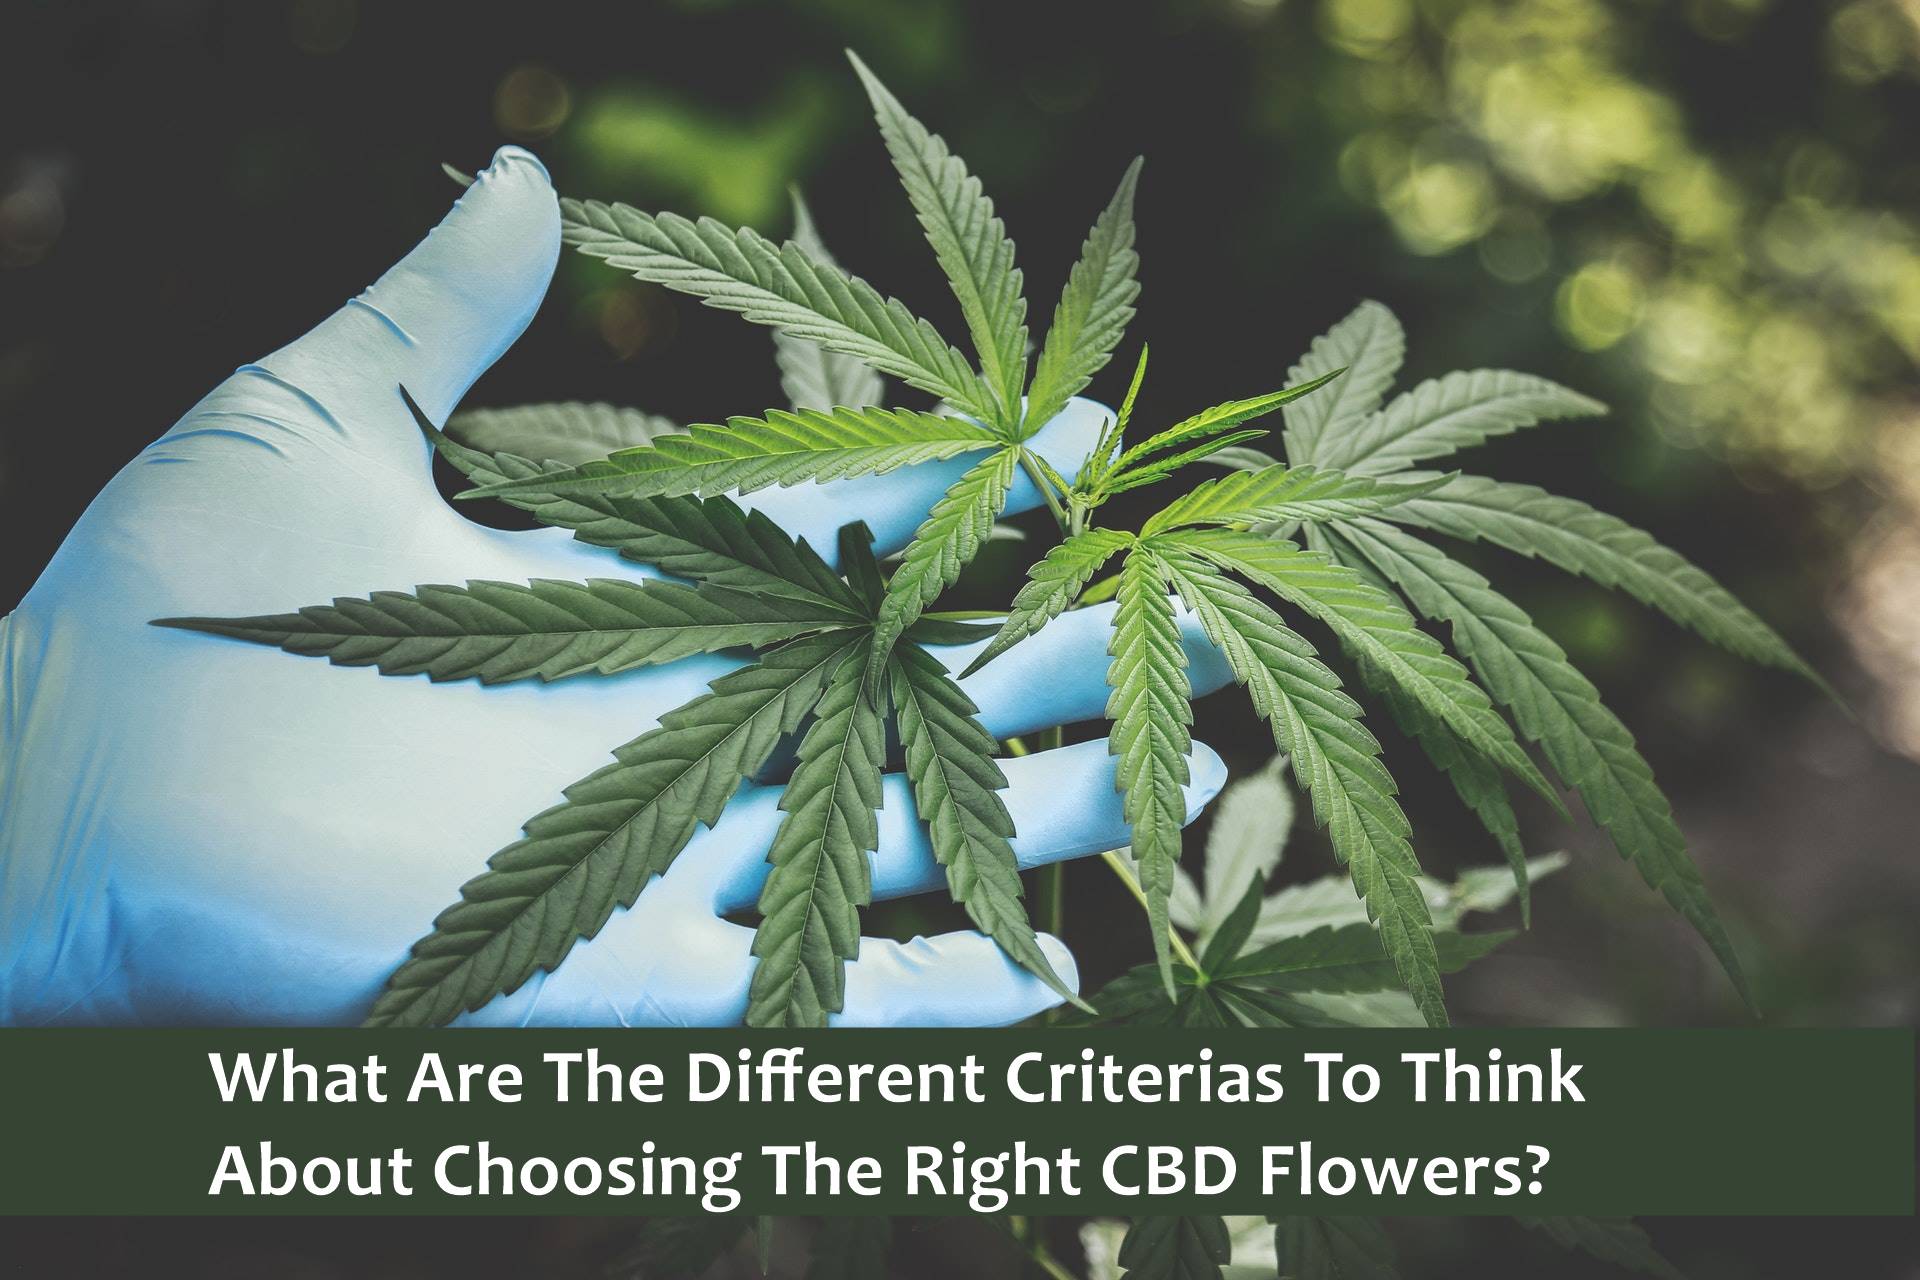 What Are The Different Criterias To Think About Choosing The Right CBD Flowers